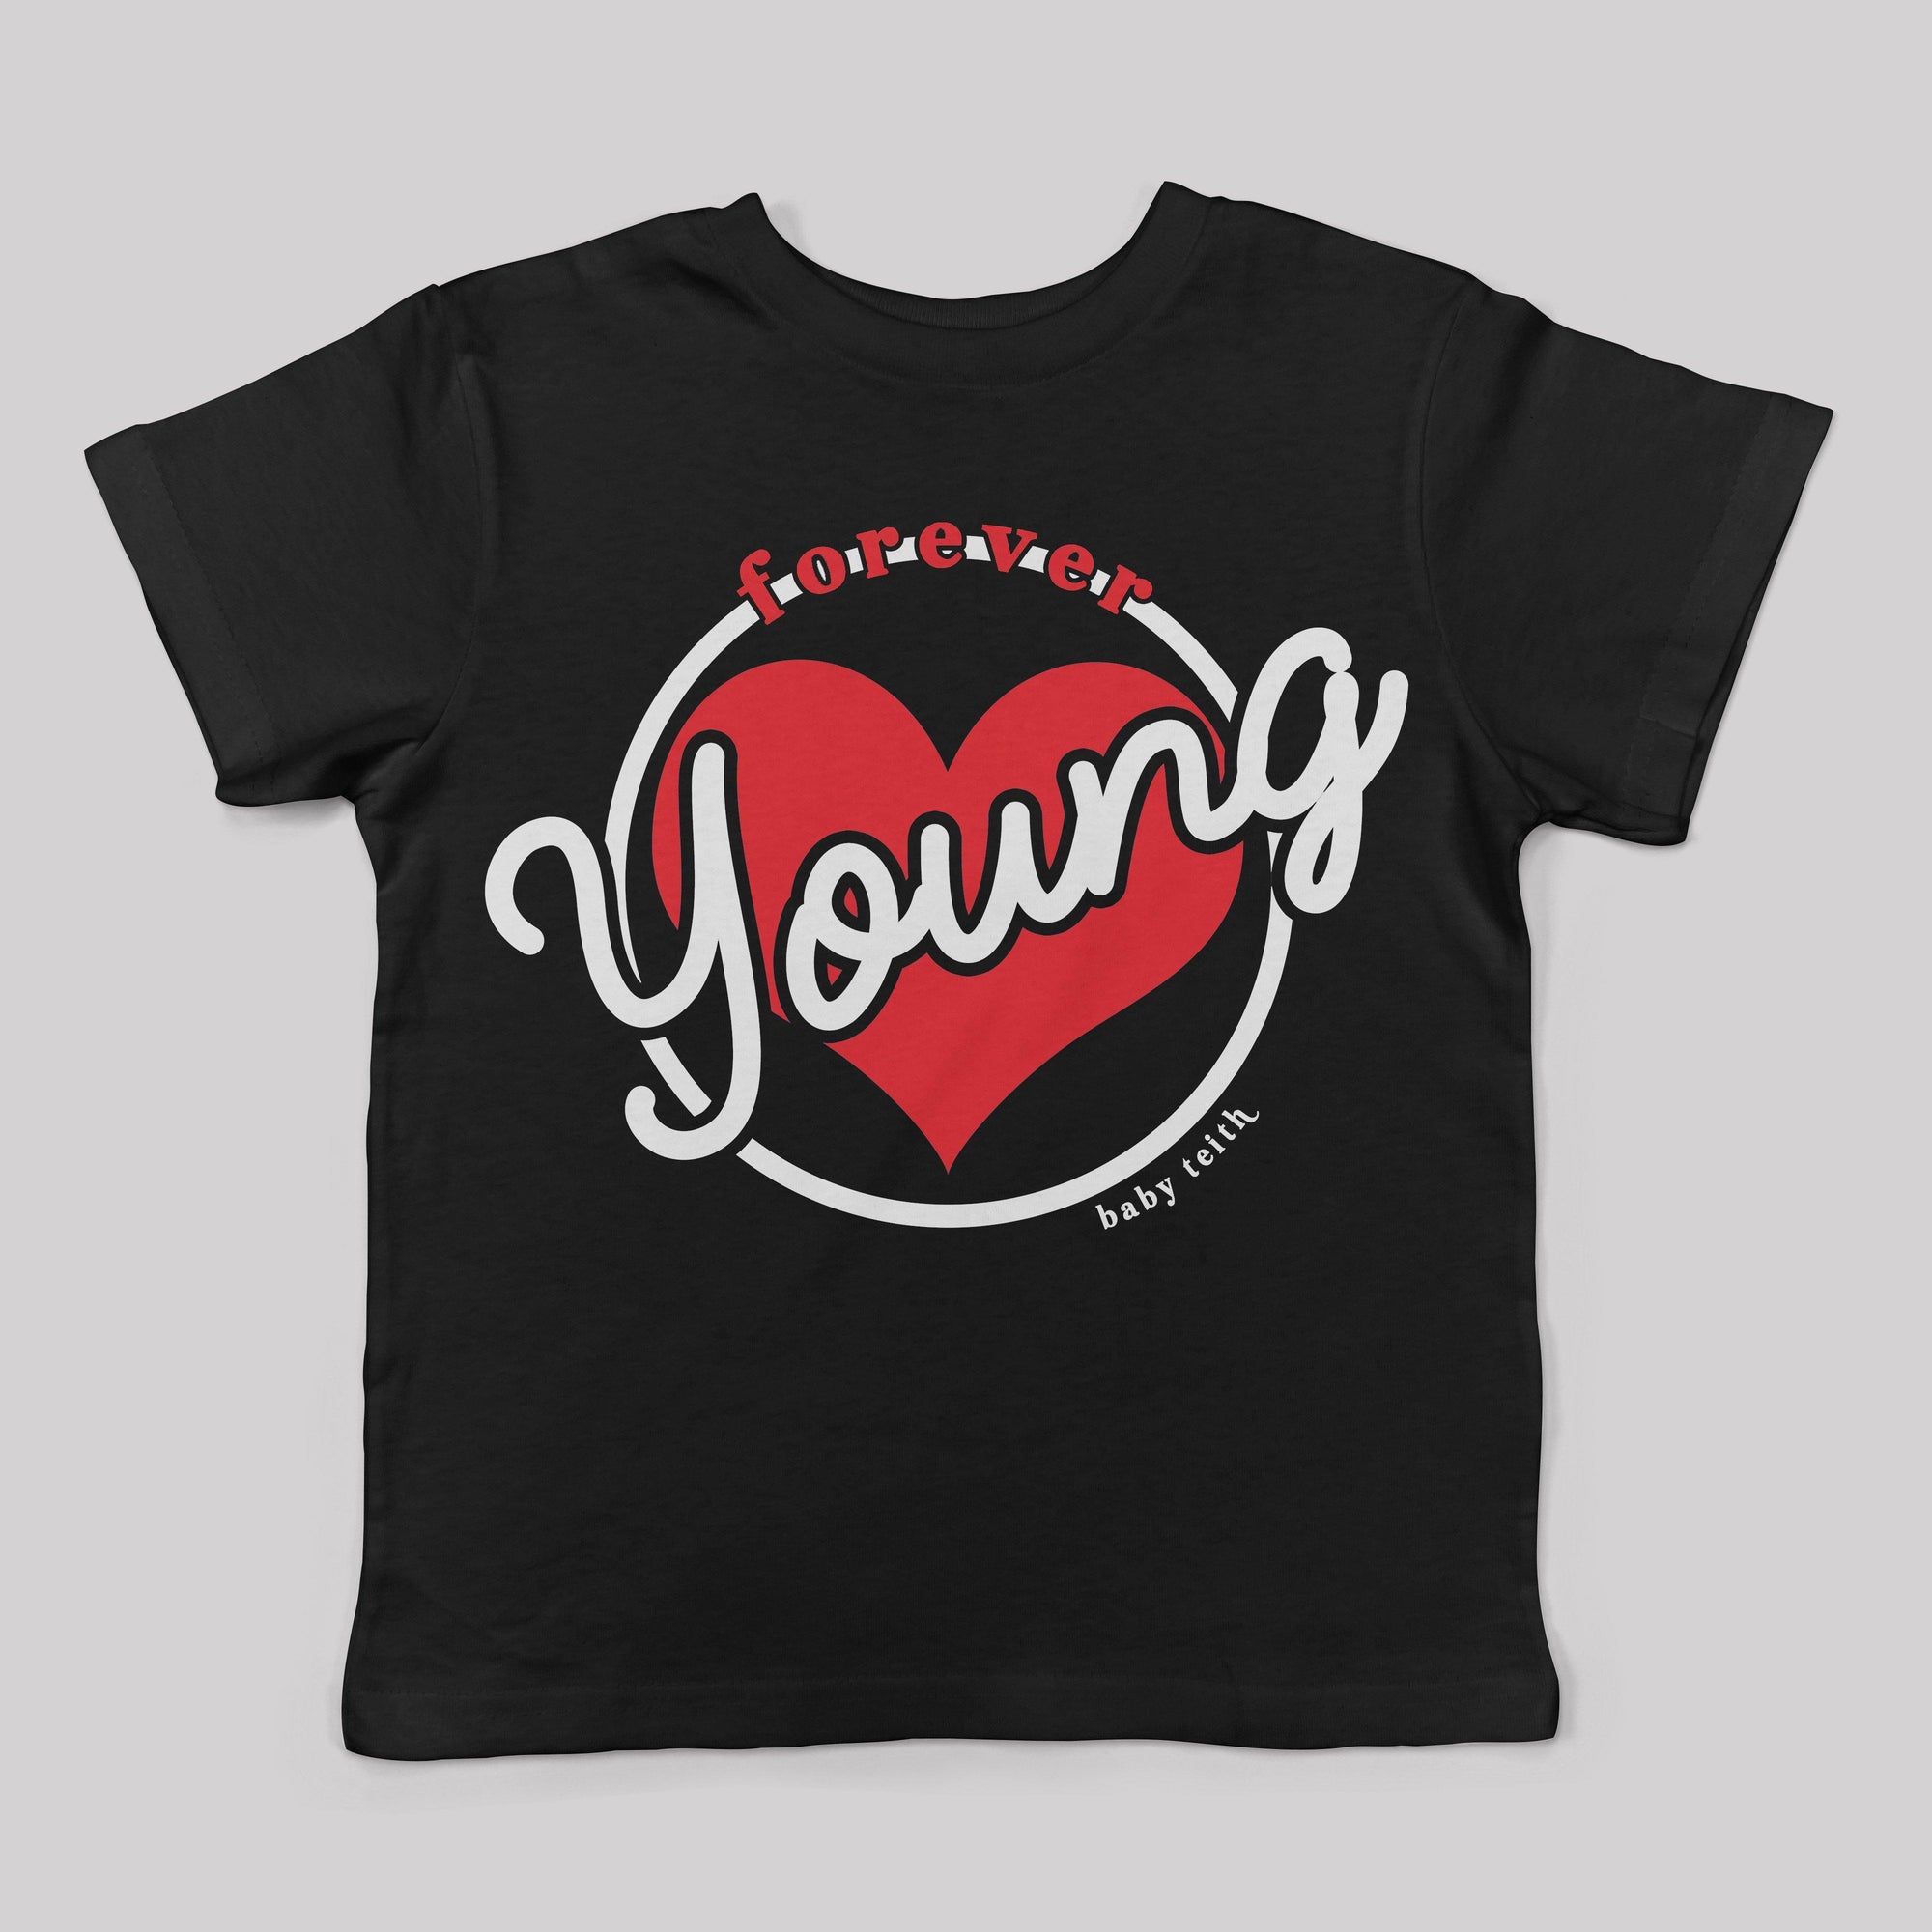 "Forever Young" Tee for Kids - Baby Teith